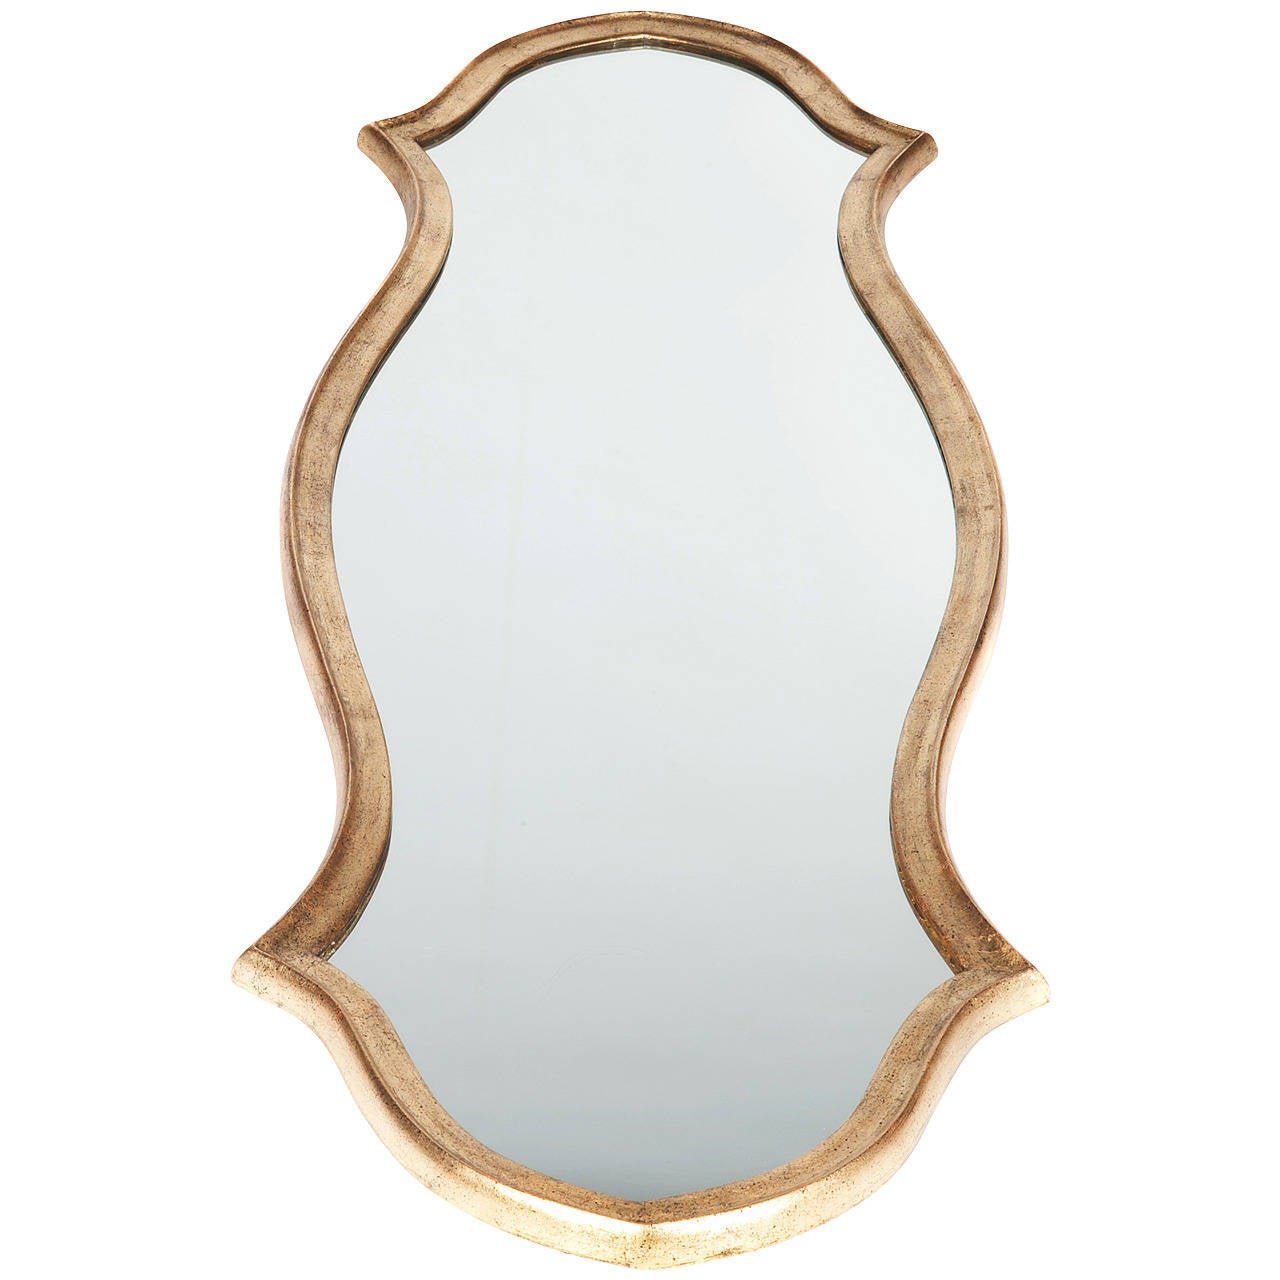 Extra-tall mirror with new gold-leaf and speckled finish. This item is in our Brooklyn showroom.